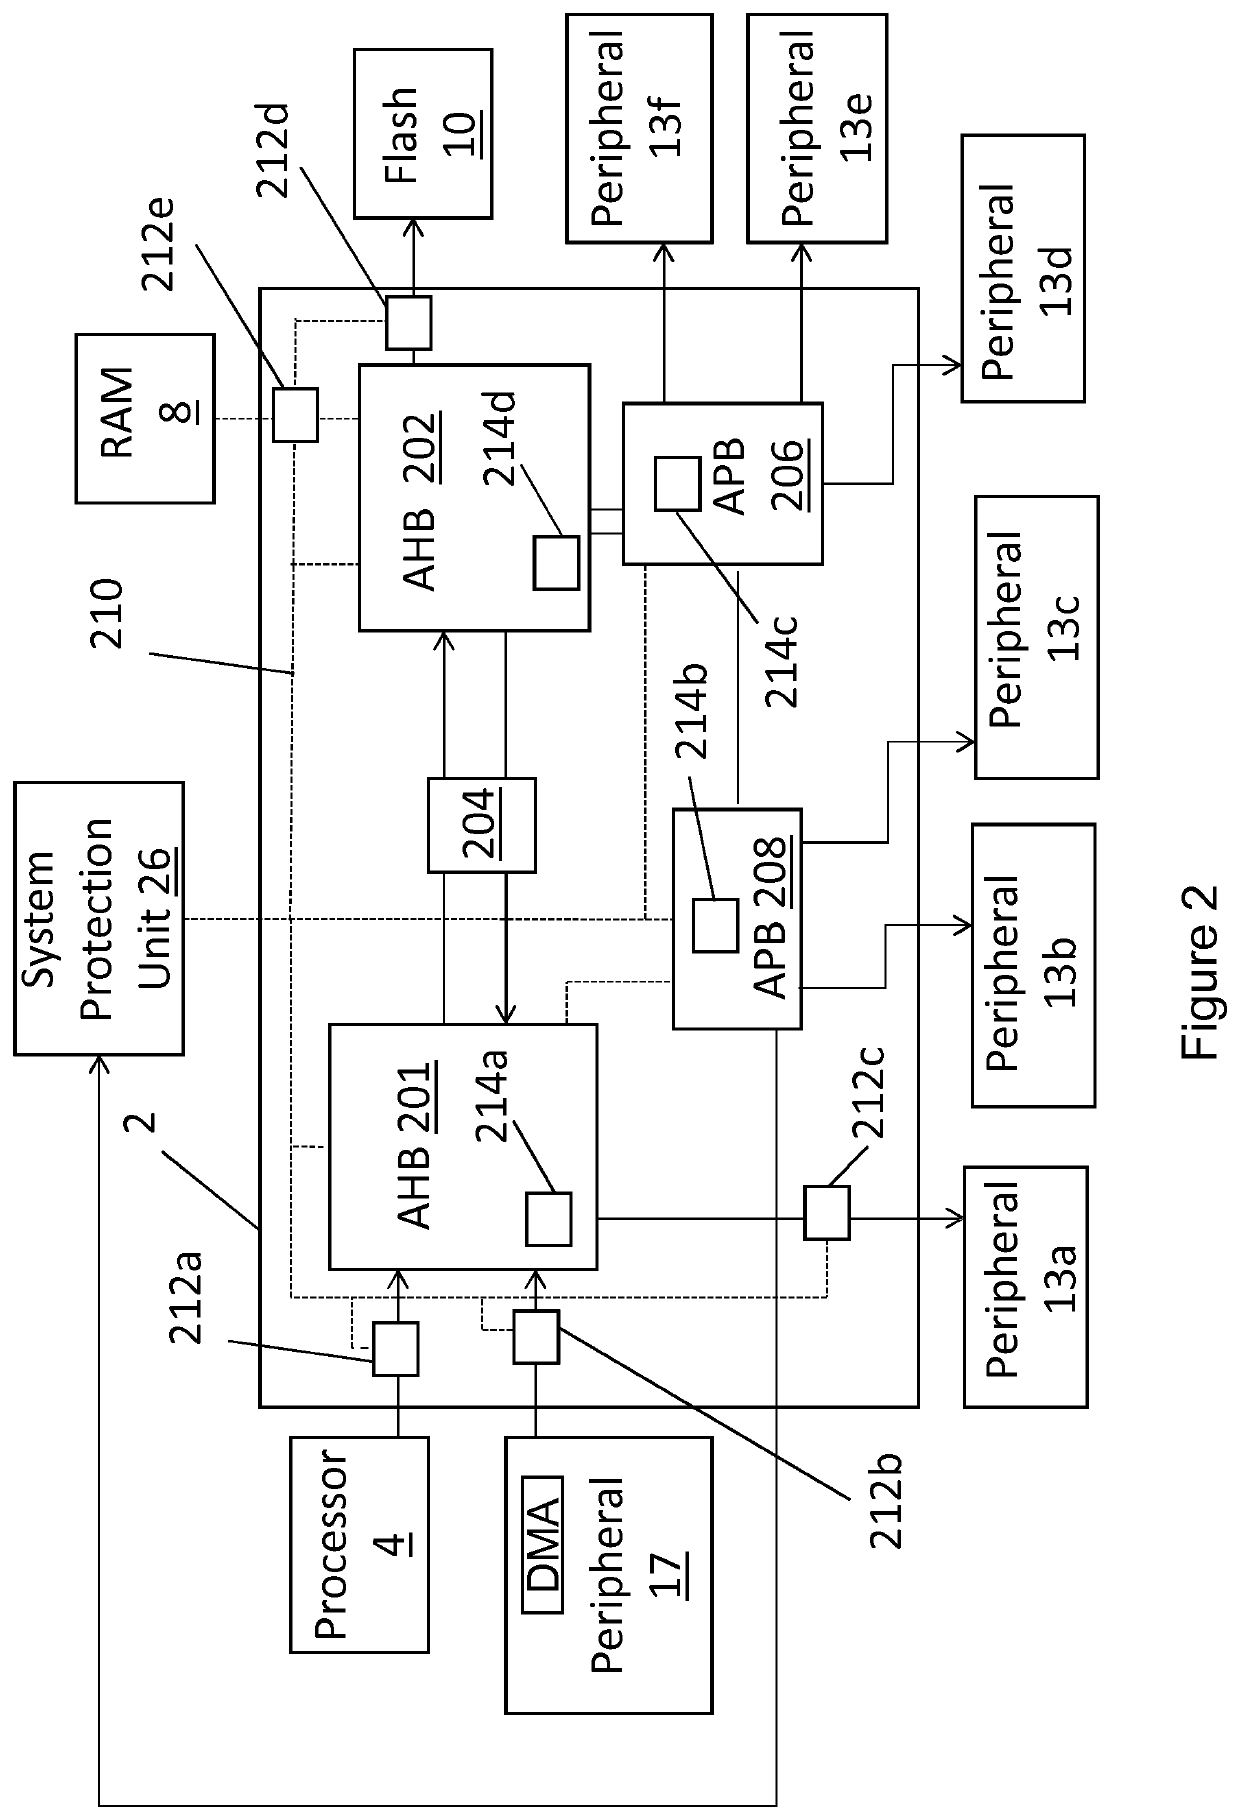 Peripheral access on a secure-aware bus system